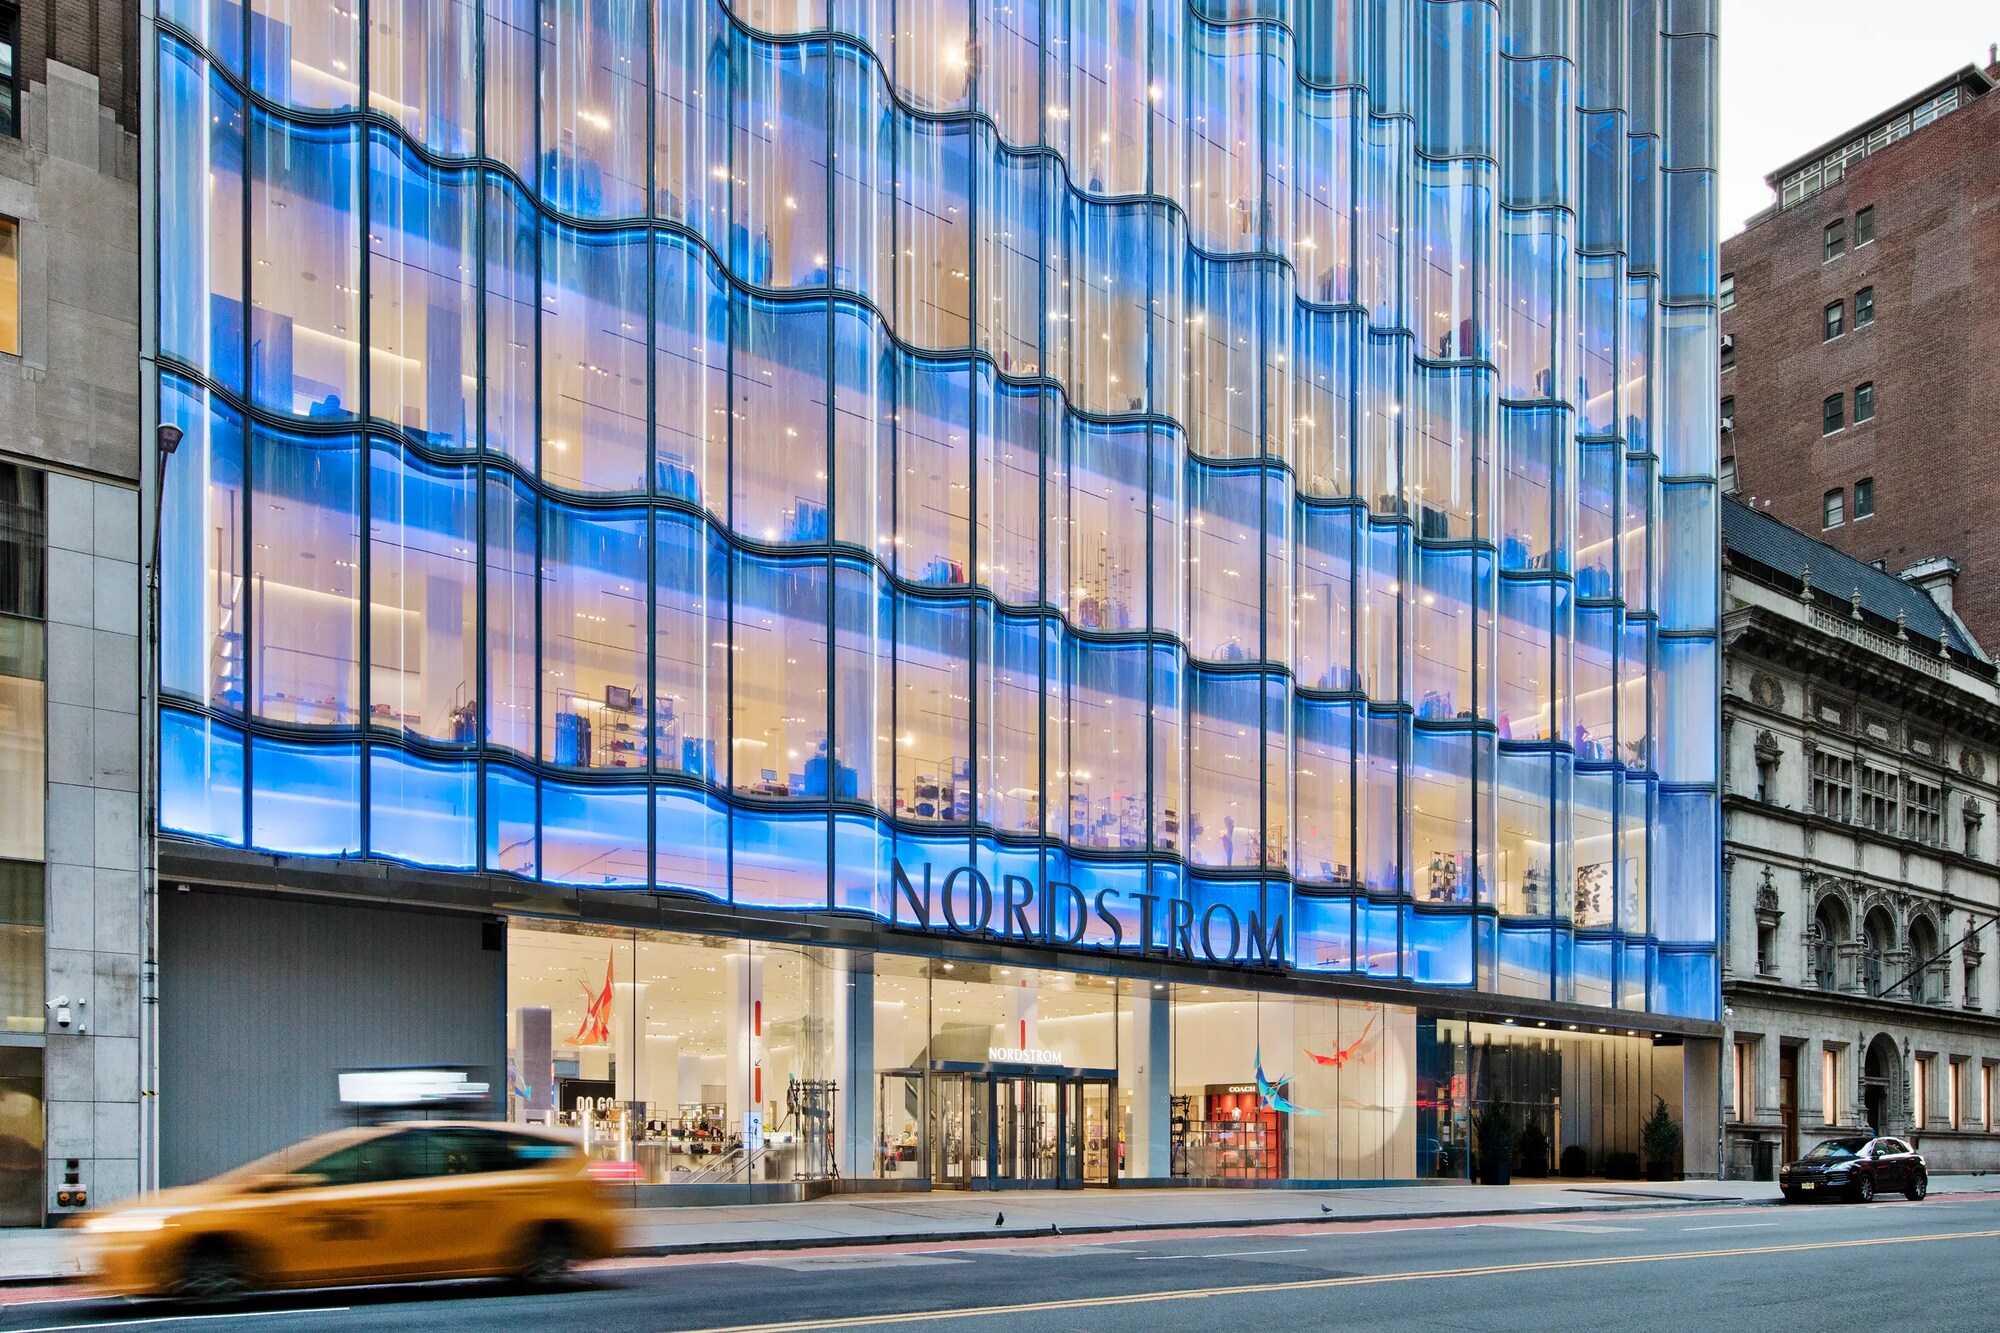 The Nordstrom New York City flagship.